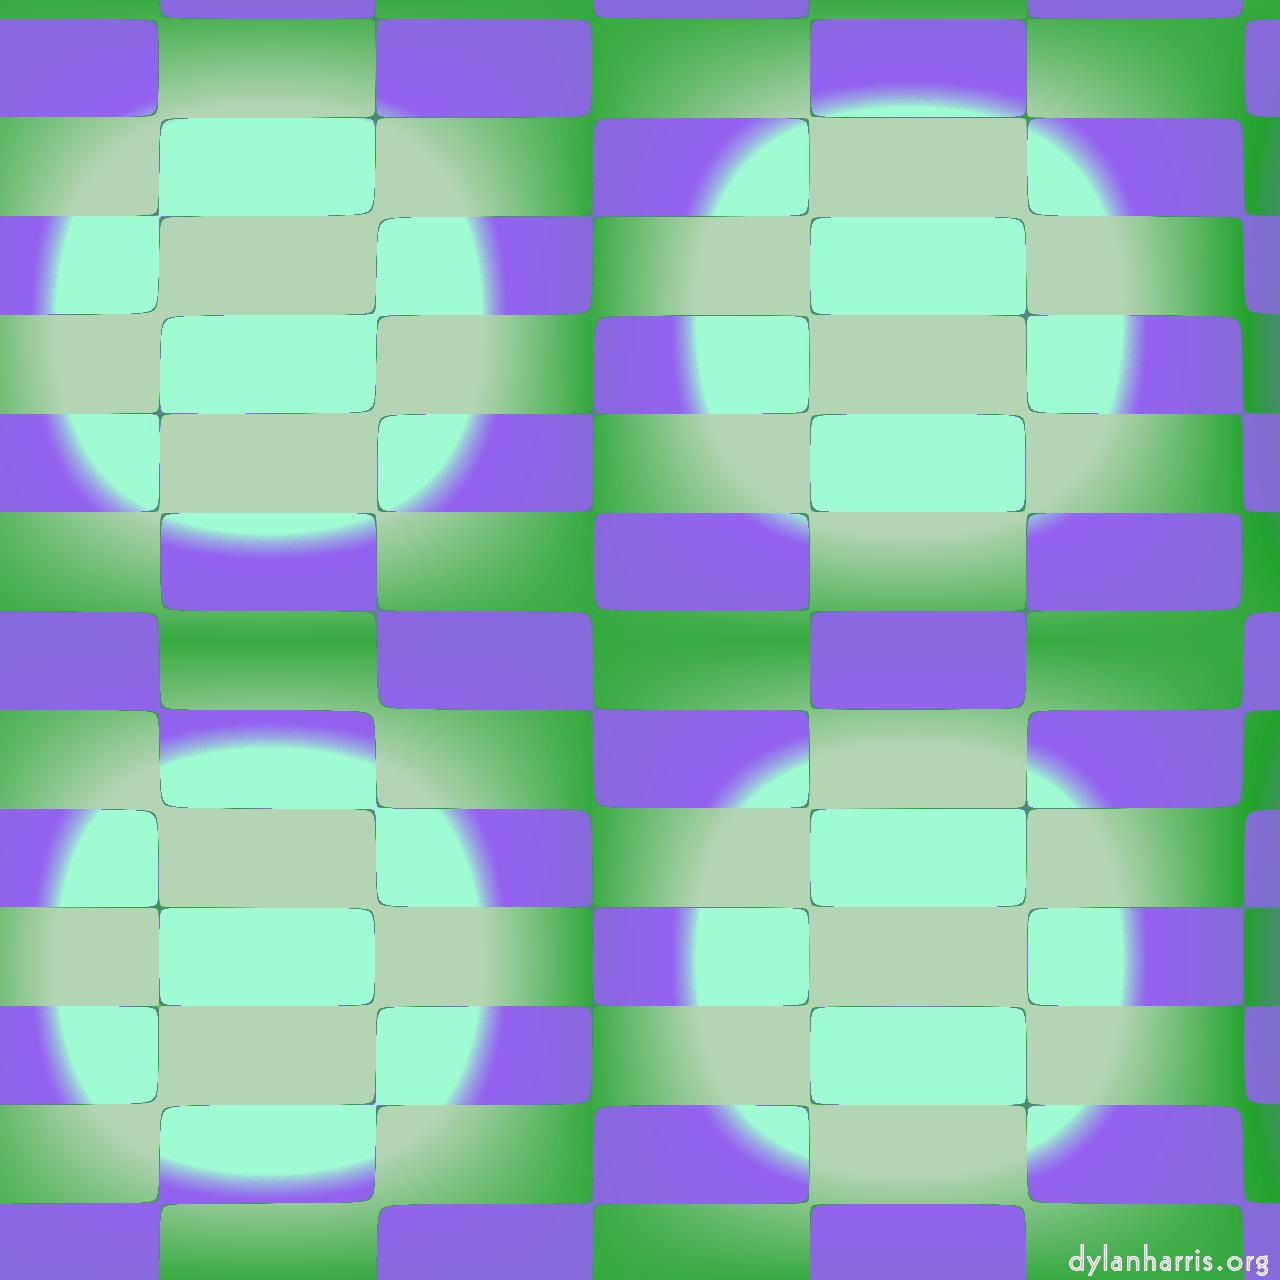 patterns 2 :: checker board and checkers